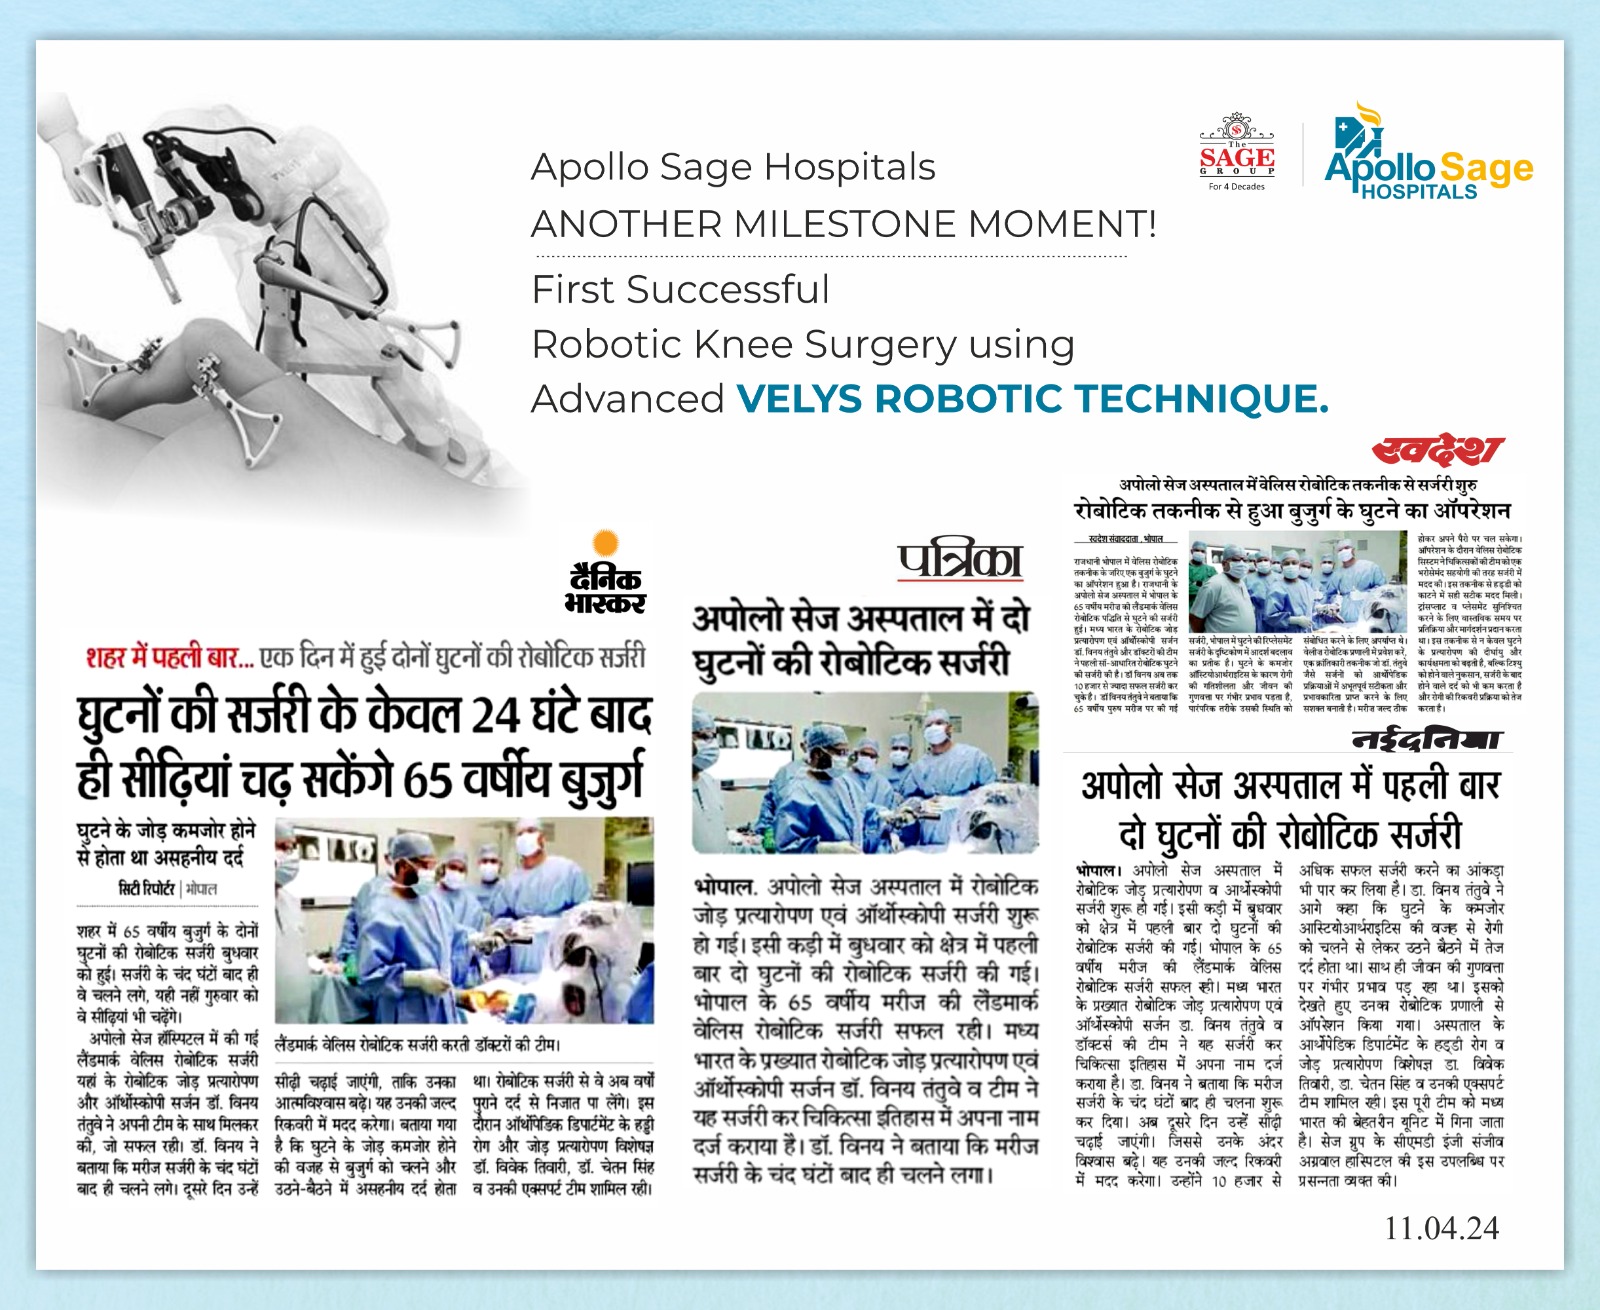 First Successful Robotic Knee Surgery Using Advanced VELYS Robotic Technique